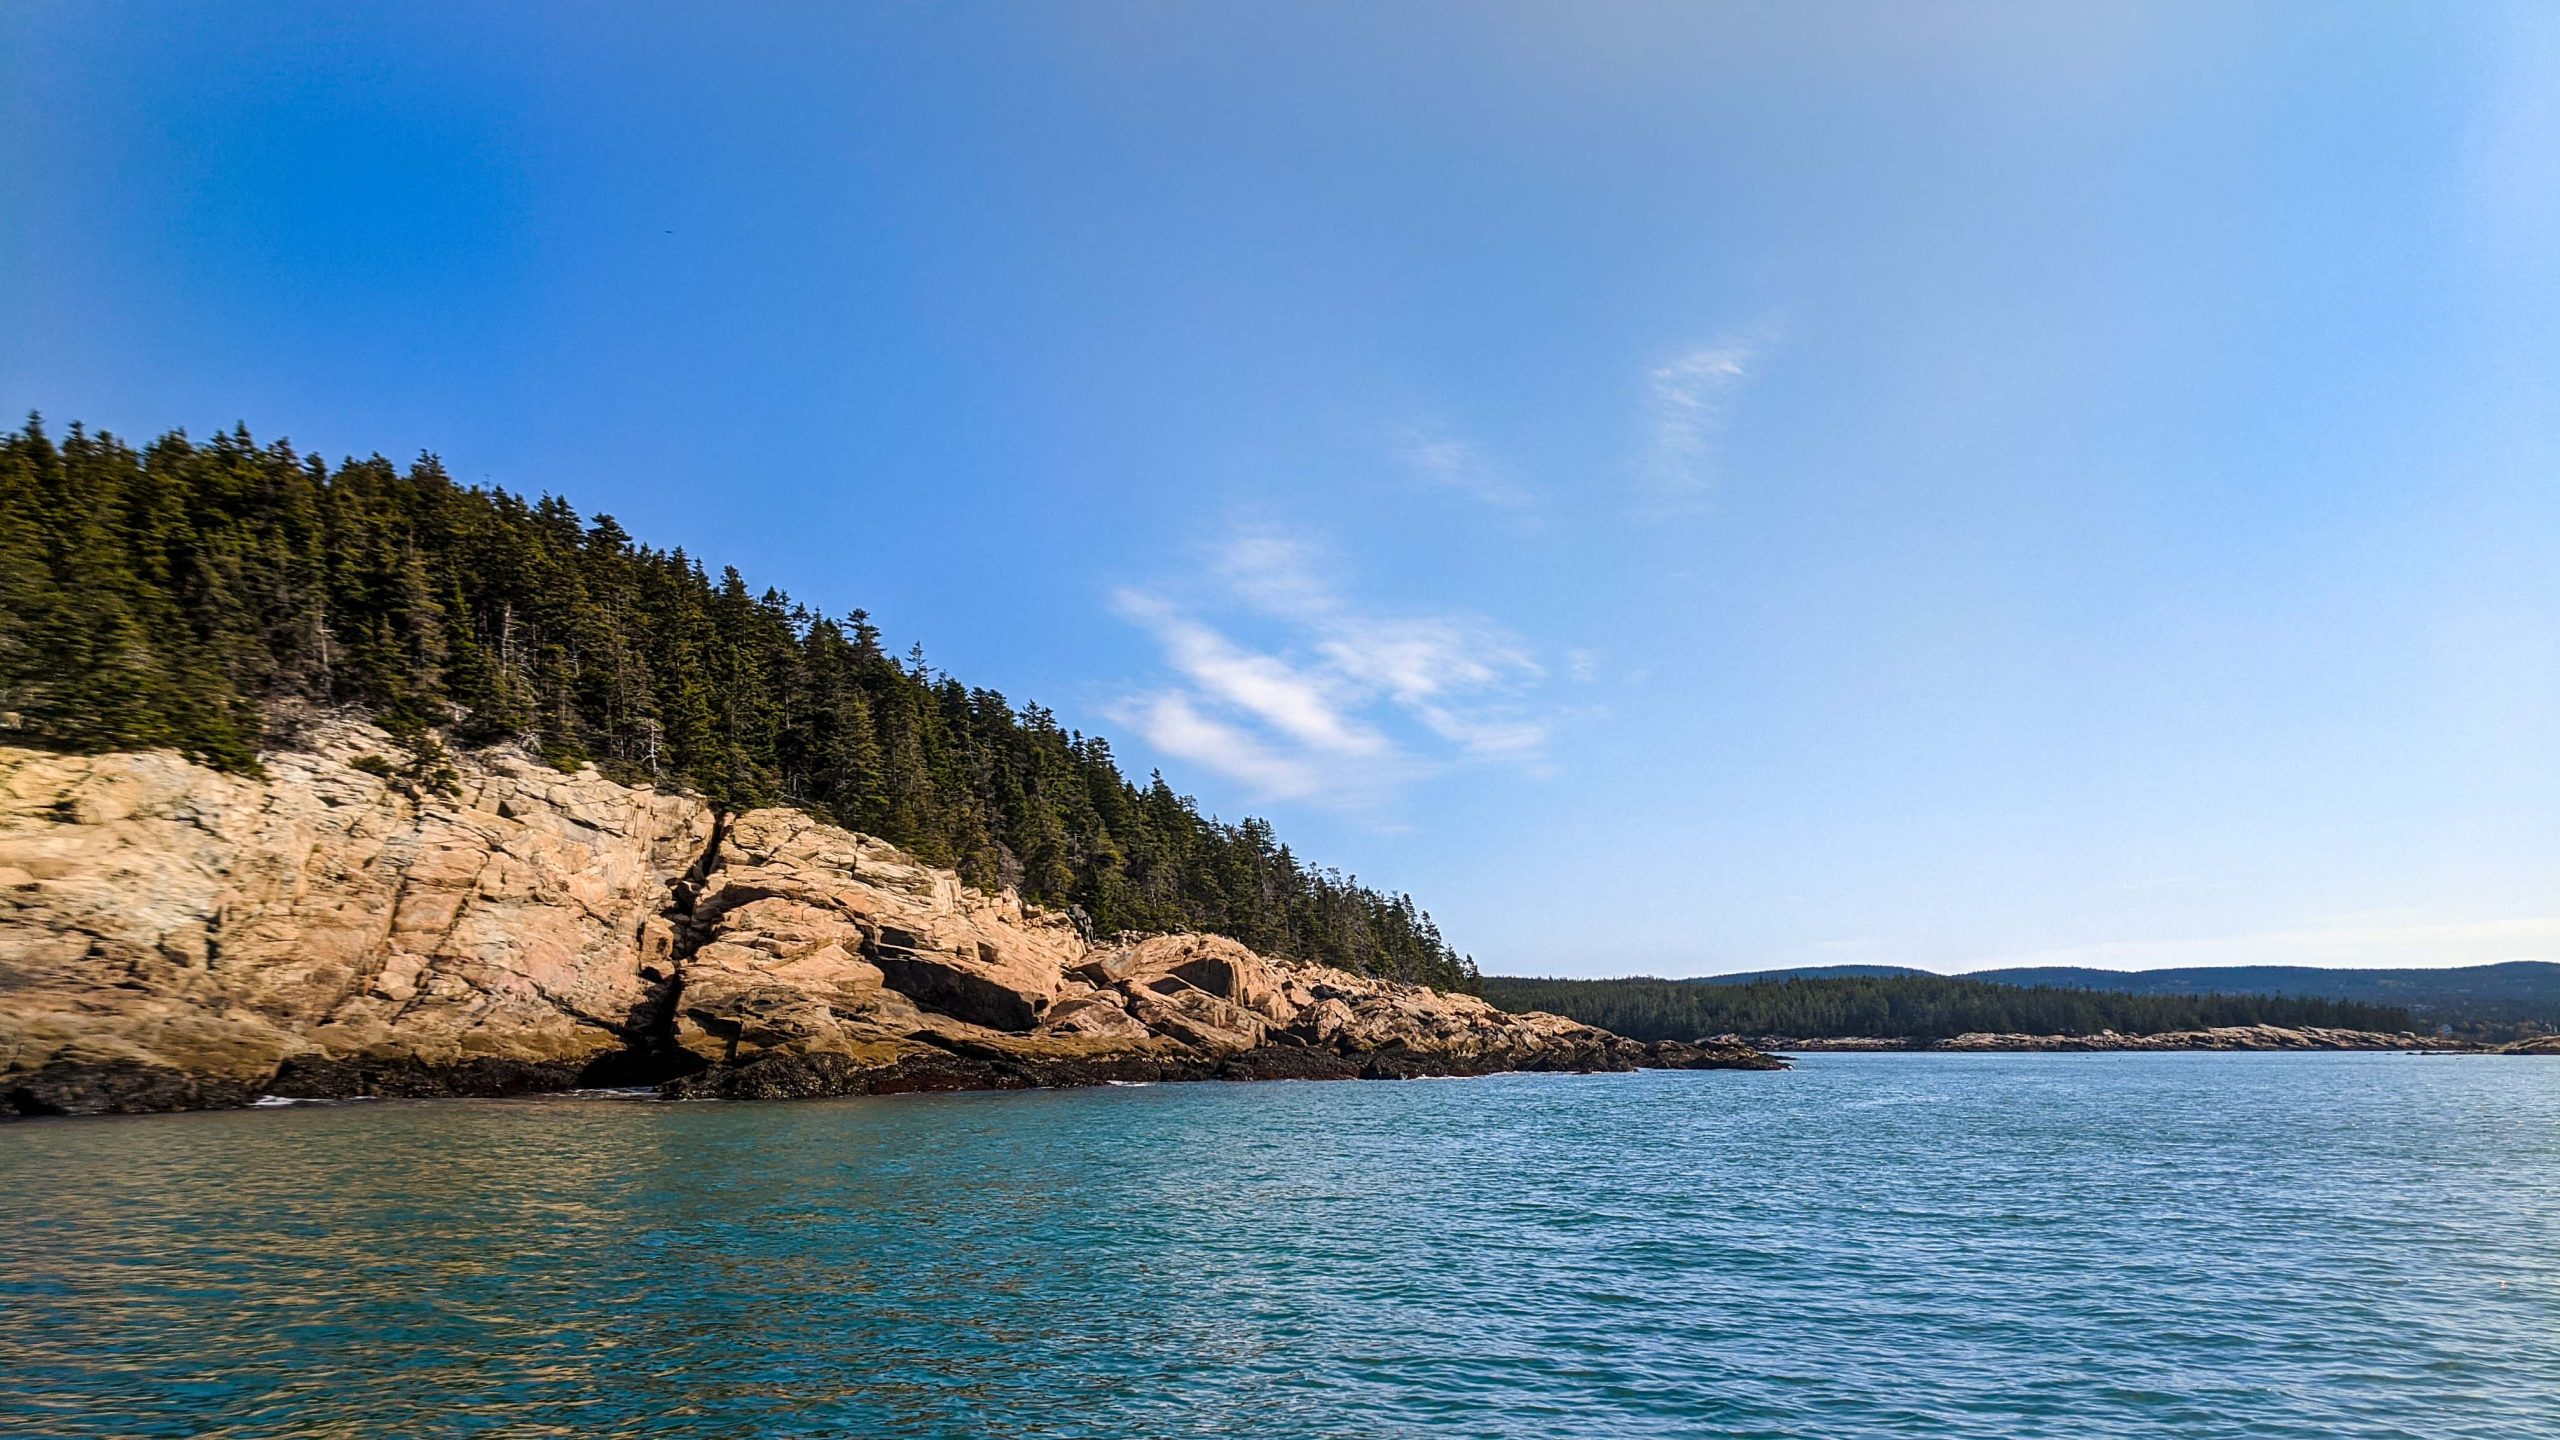 Rocky coastline topped by trees with blue water and sky